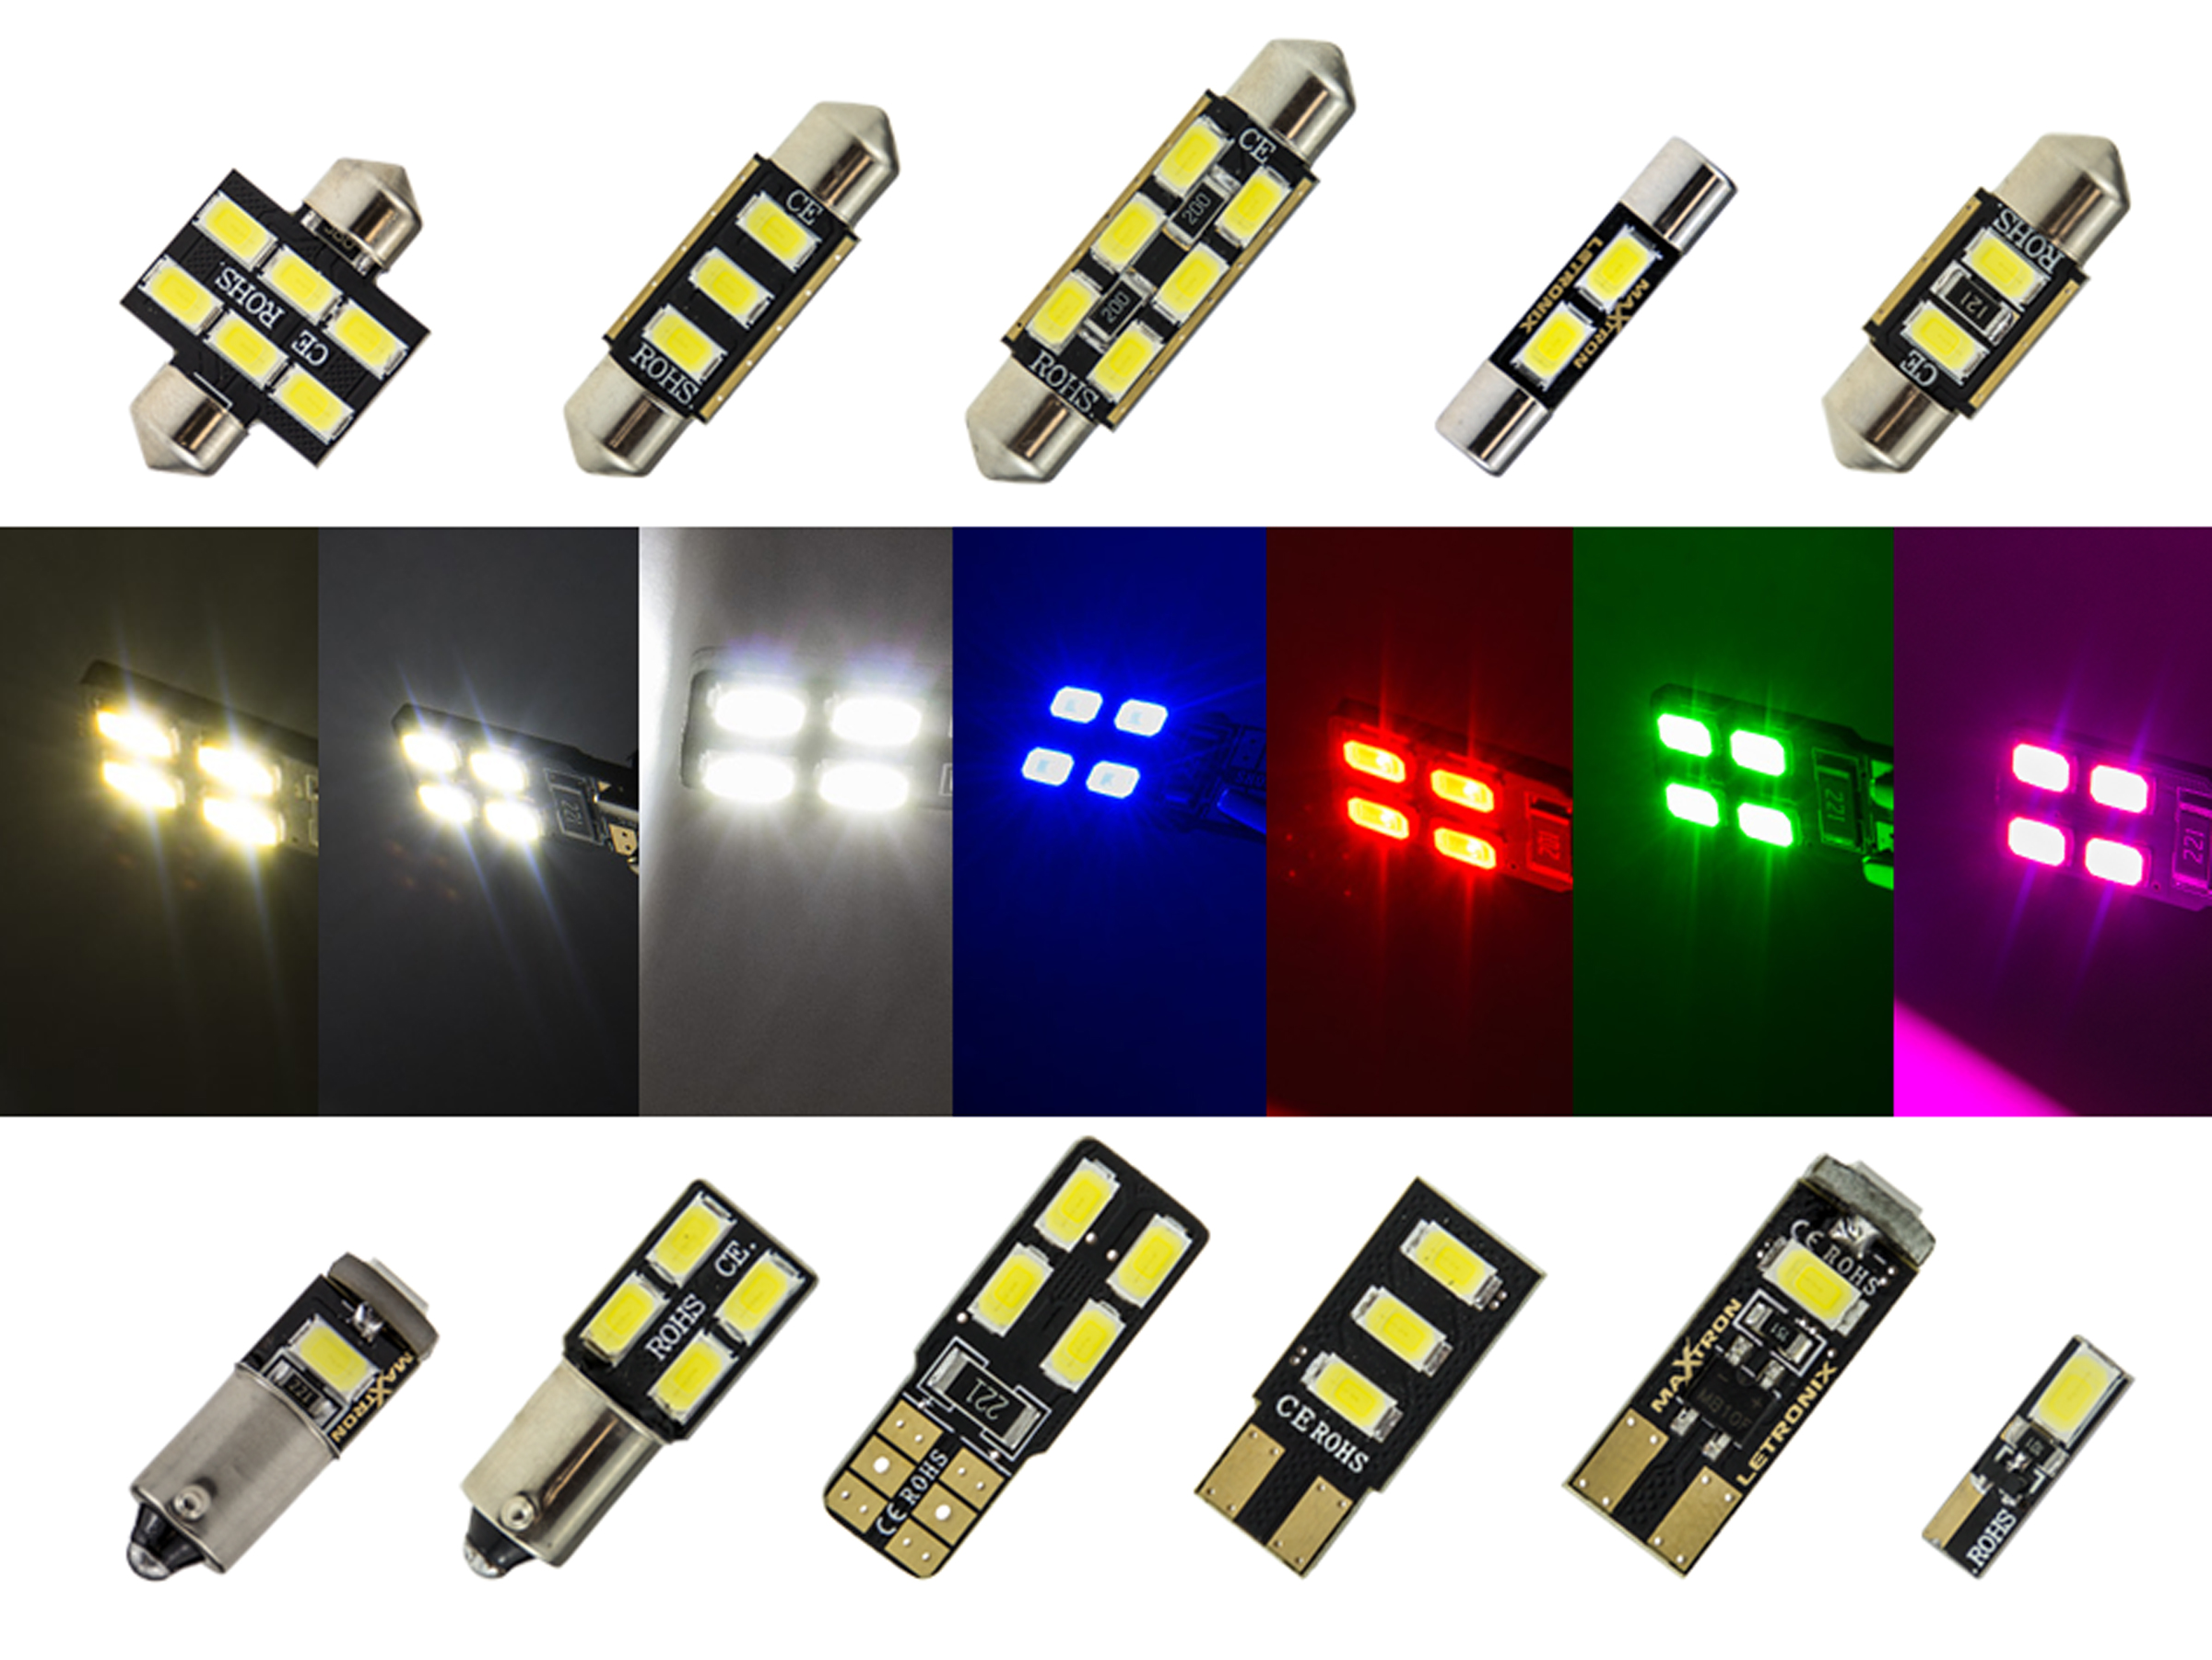 https://www.blauertacho4u.de/images/product_images/original_images/MaXtron---SMD-LED-Innenraumbeleuchtung-fuer-Nissan-Qashqai-J11-mit-Panoramadach69976666_2.jpg